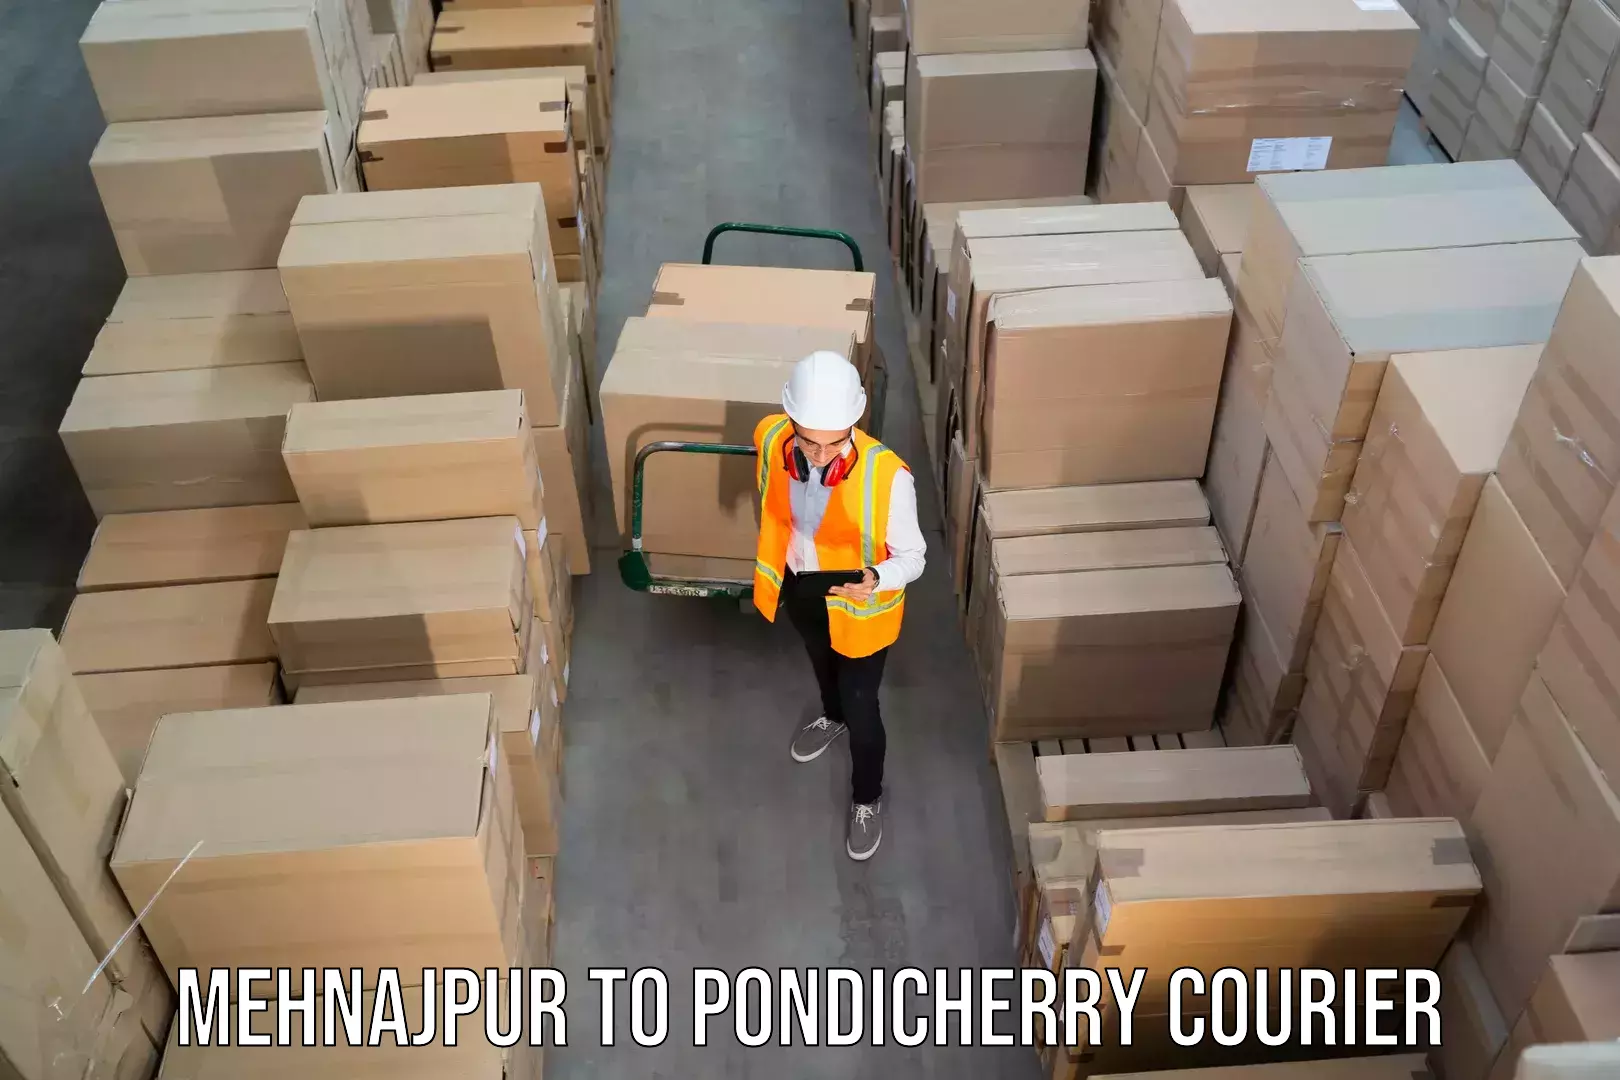 24-hour delivery options Mehnajpur to Pondicherry